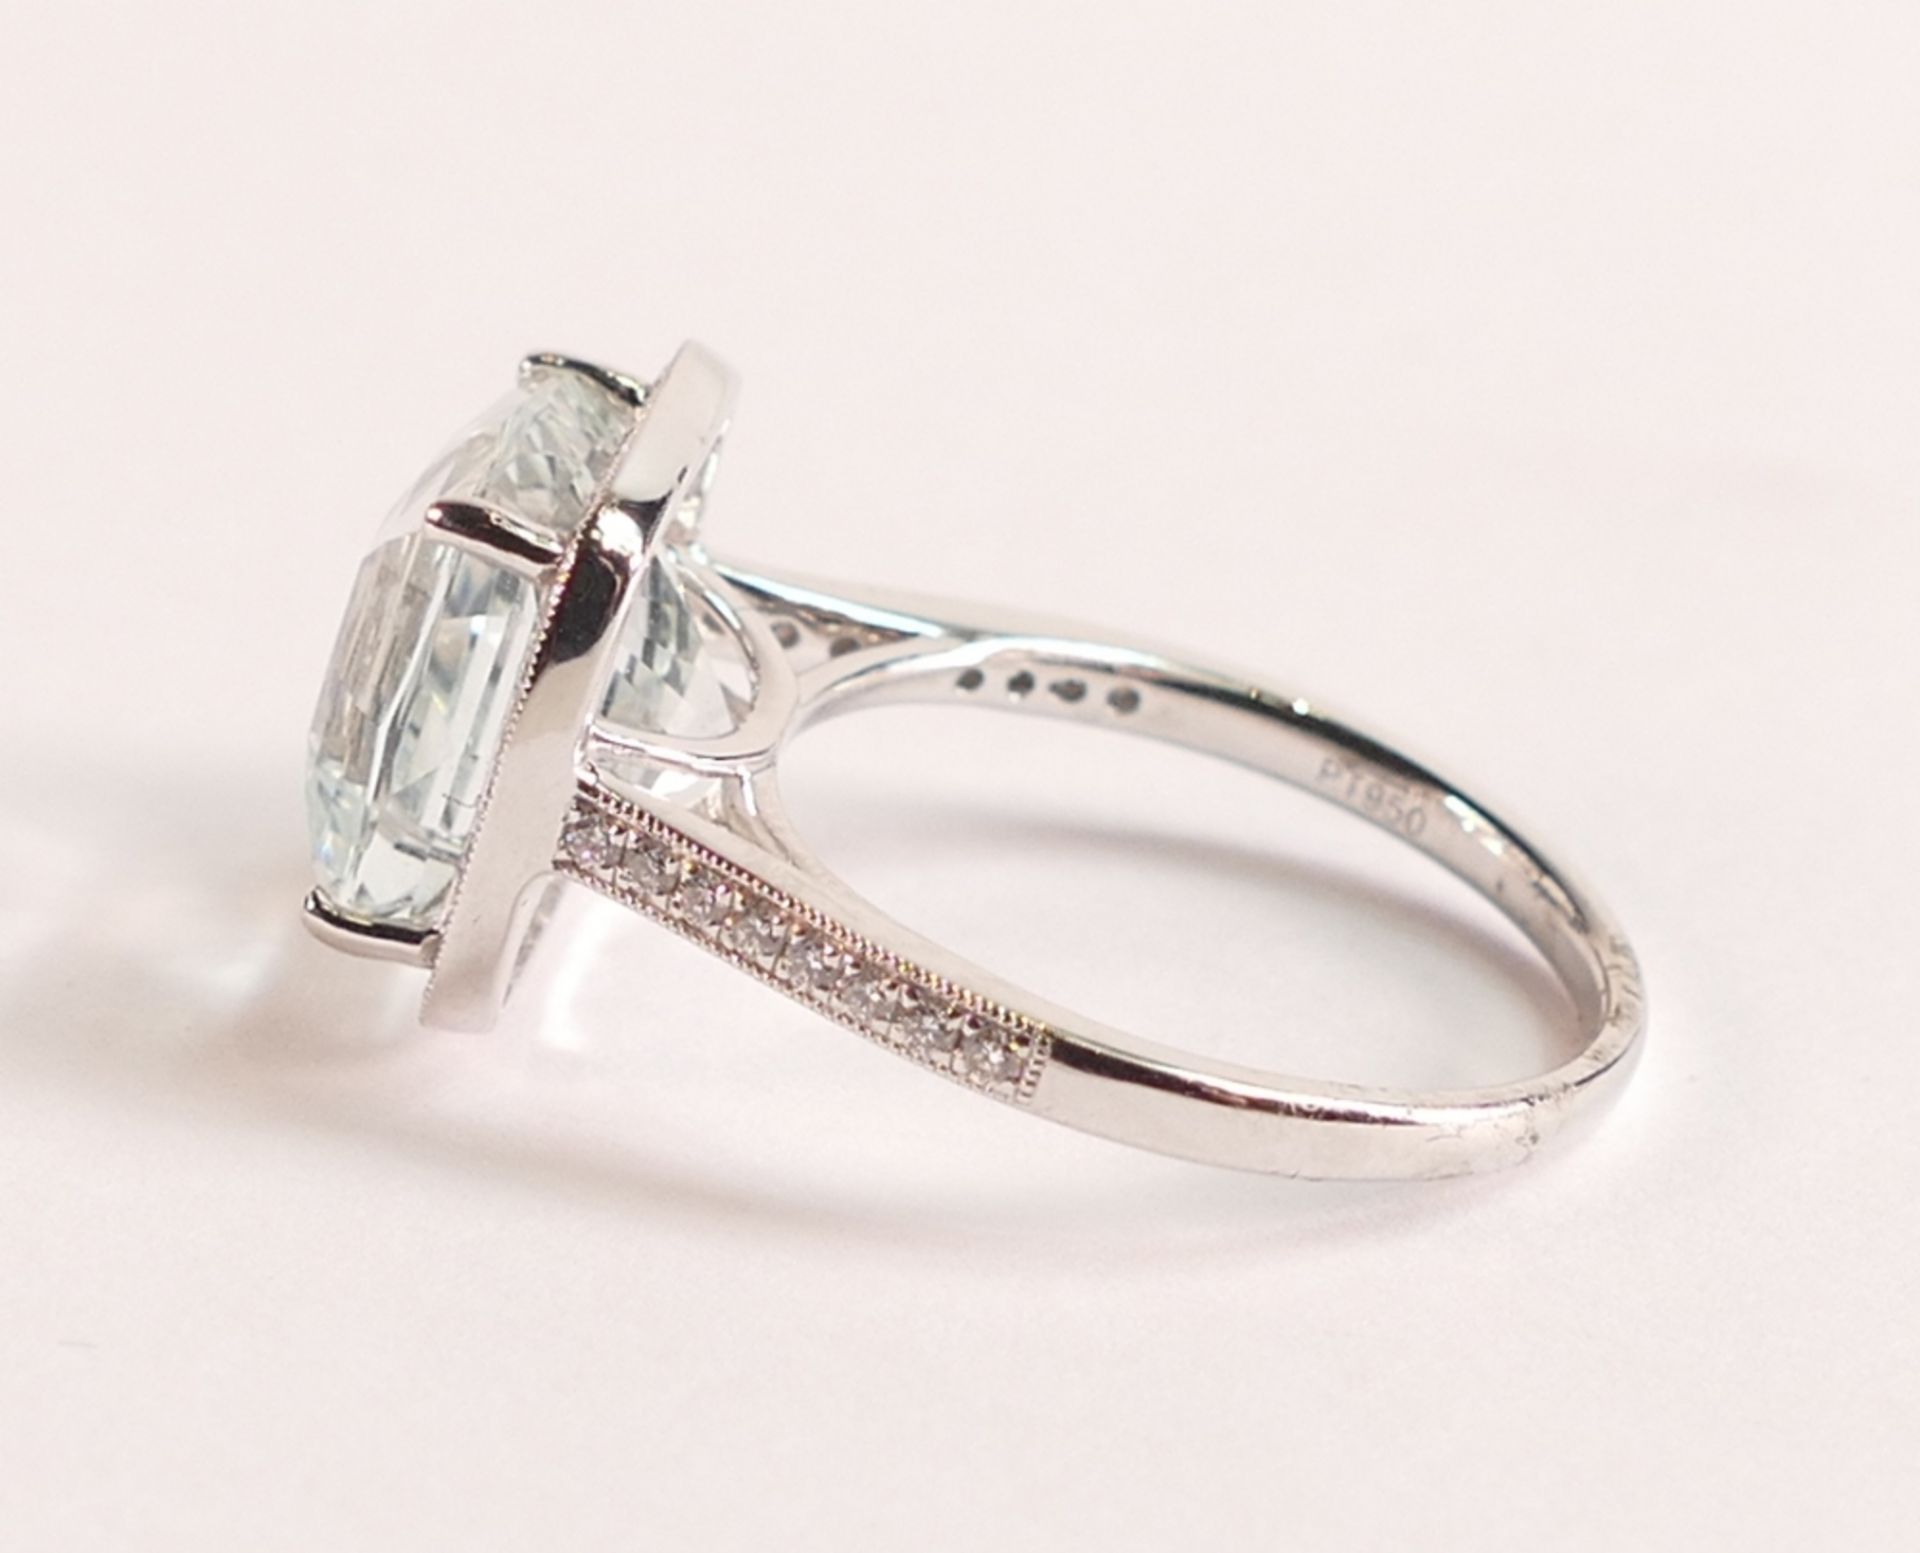 Platinum Ring With Clear Crystal Quartz and Diamonds - Crystal quartz measures 10.48mm by 10.48mm - Image 2 of 3